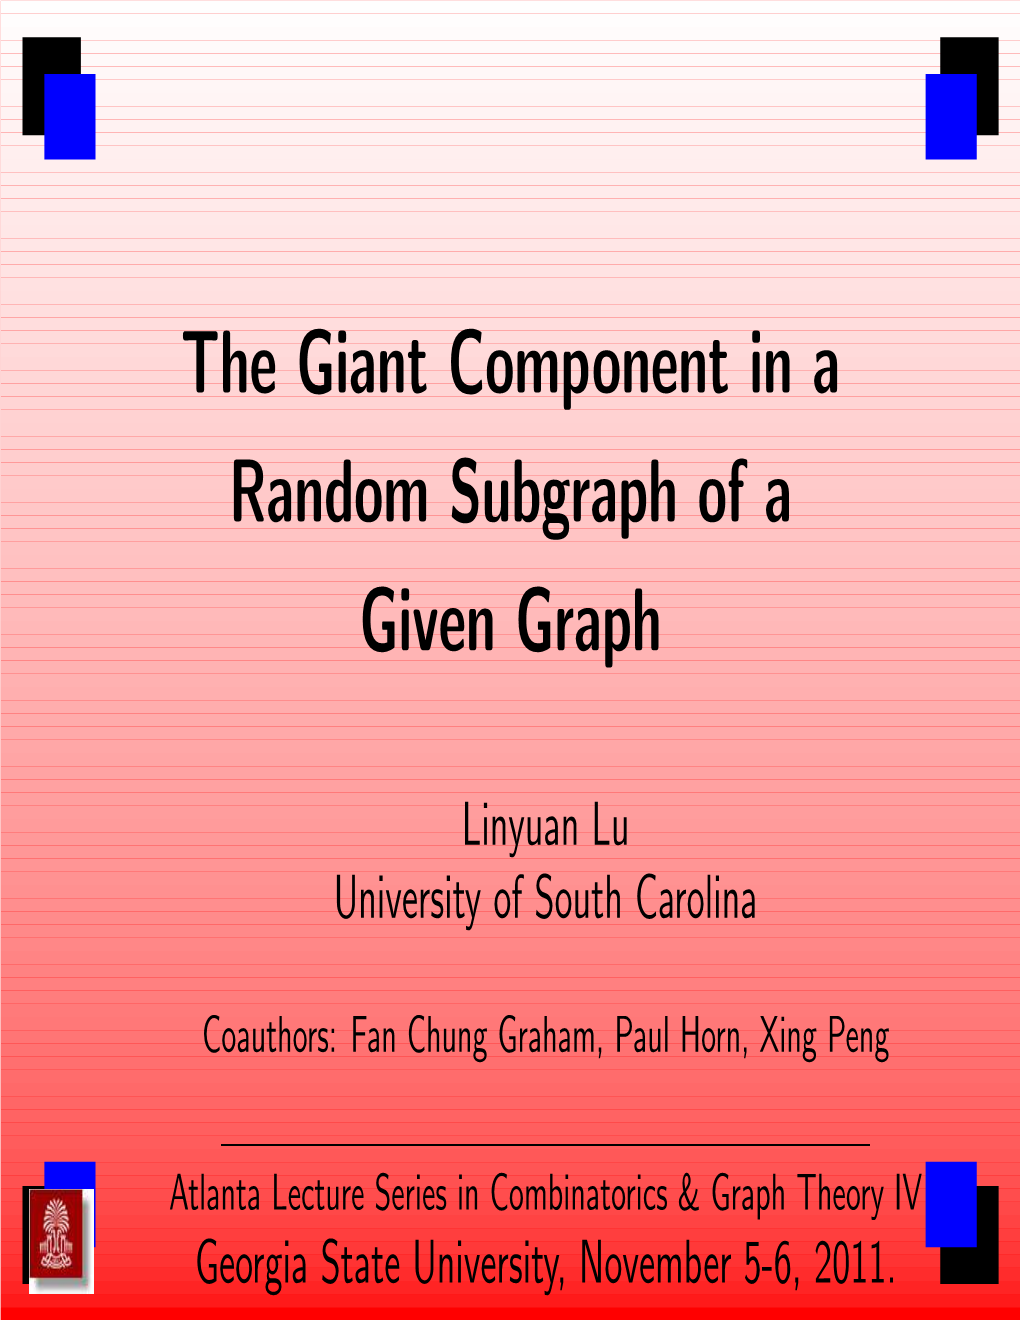 The Giant Component in a Random Subgraph of a Given Graph